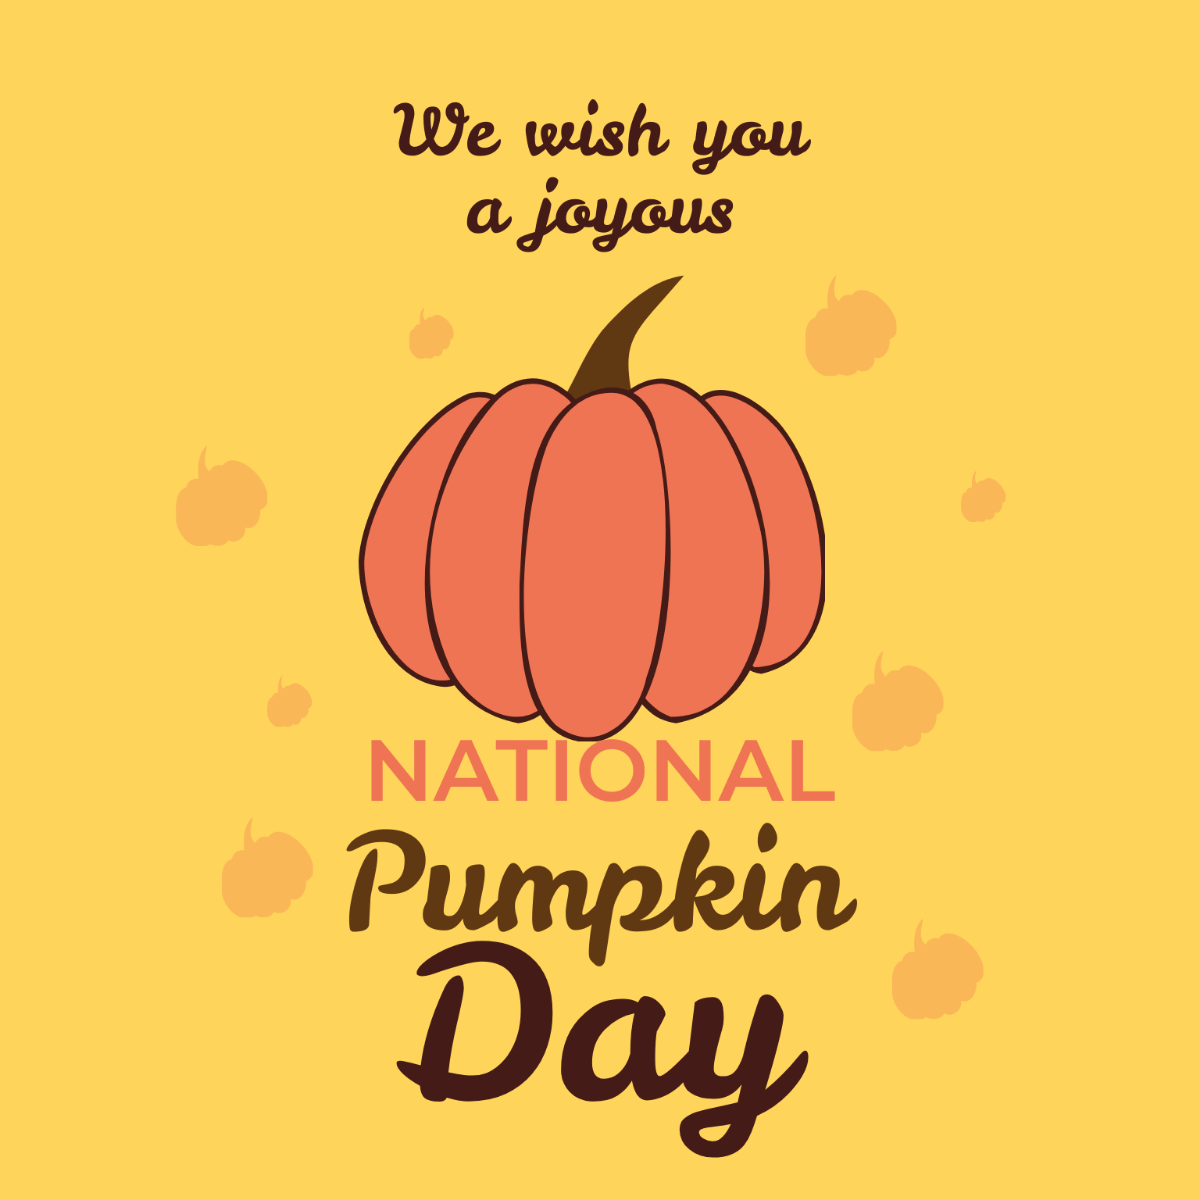 Free National Pumpkin Day Wishes Vector Template